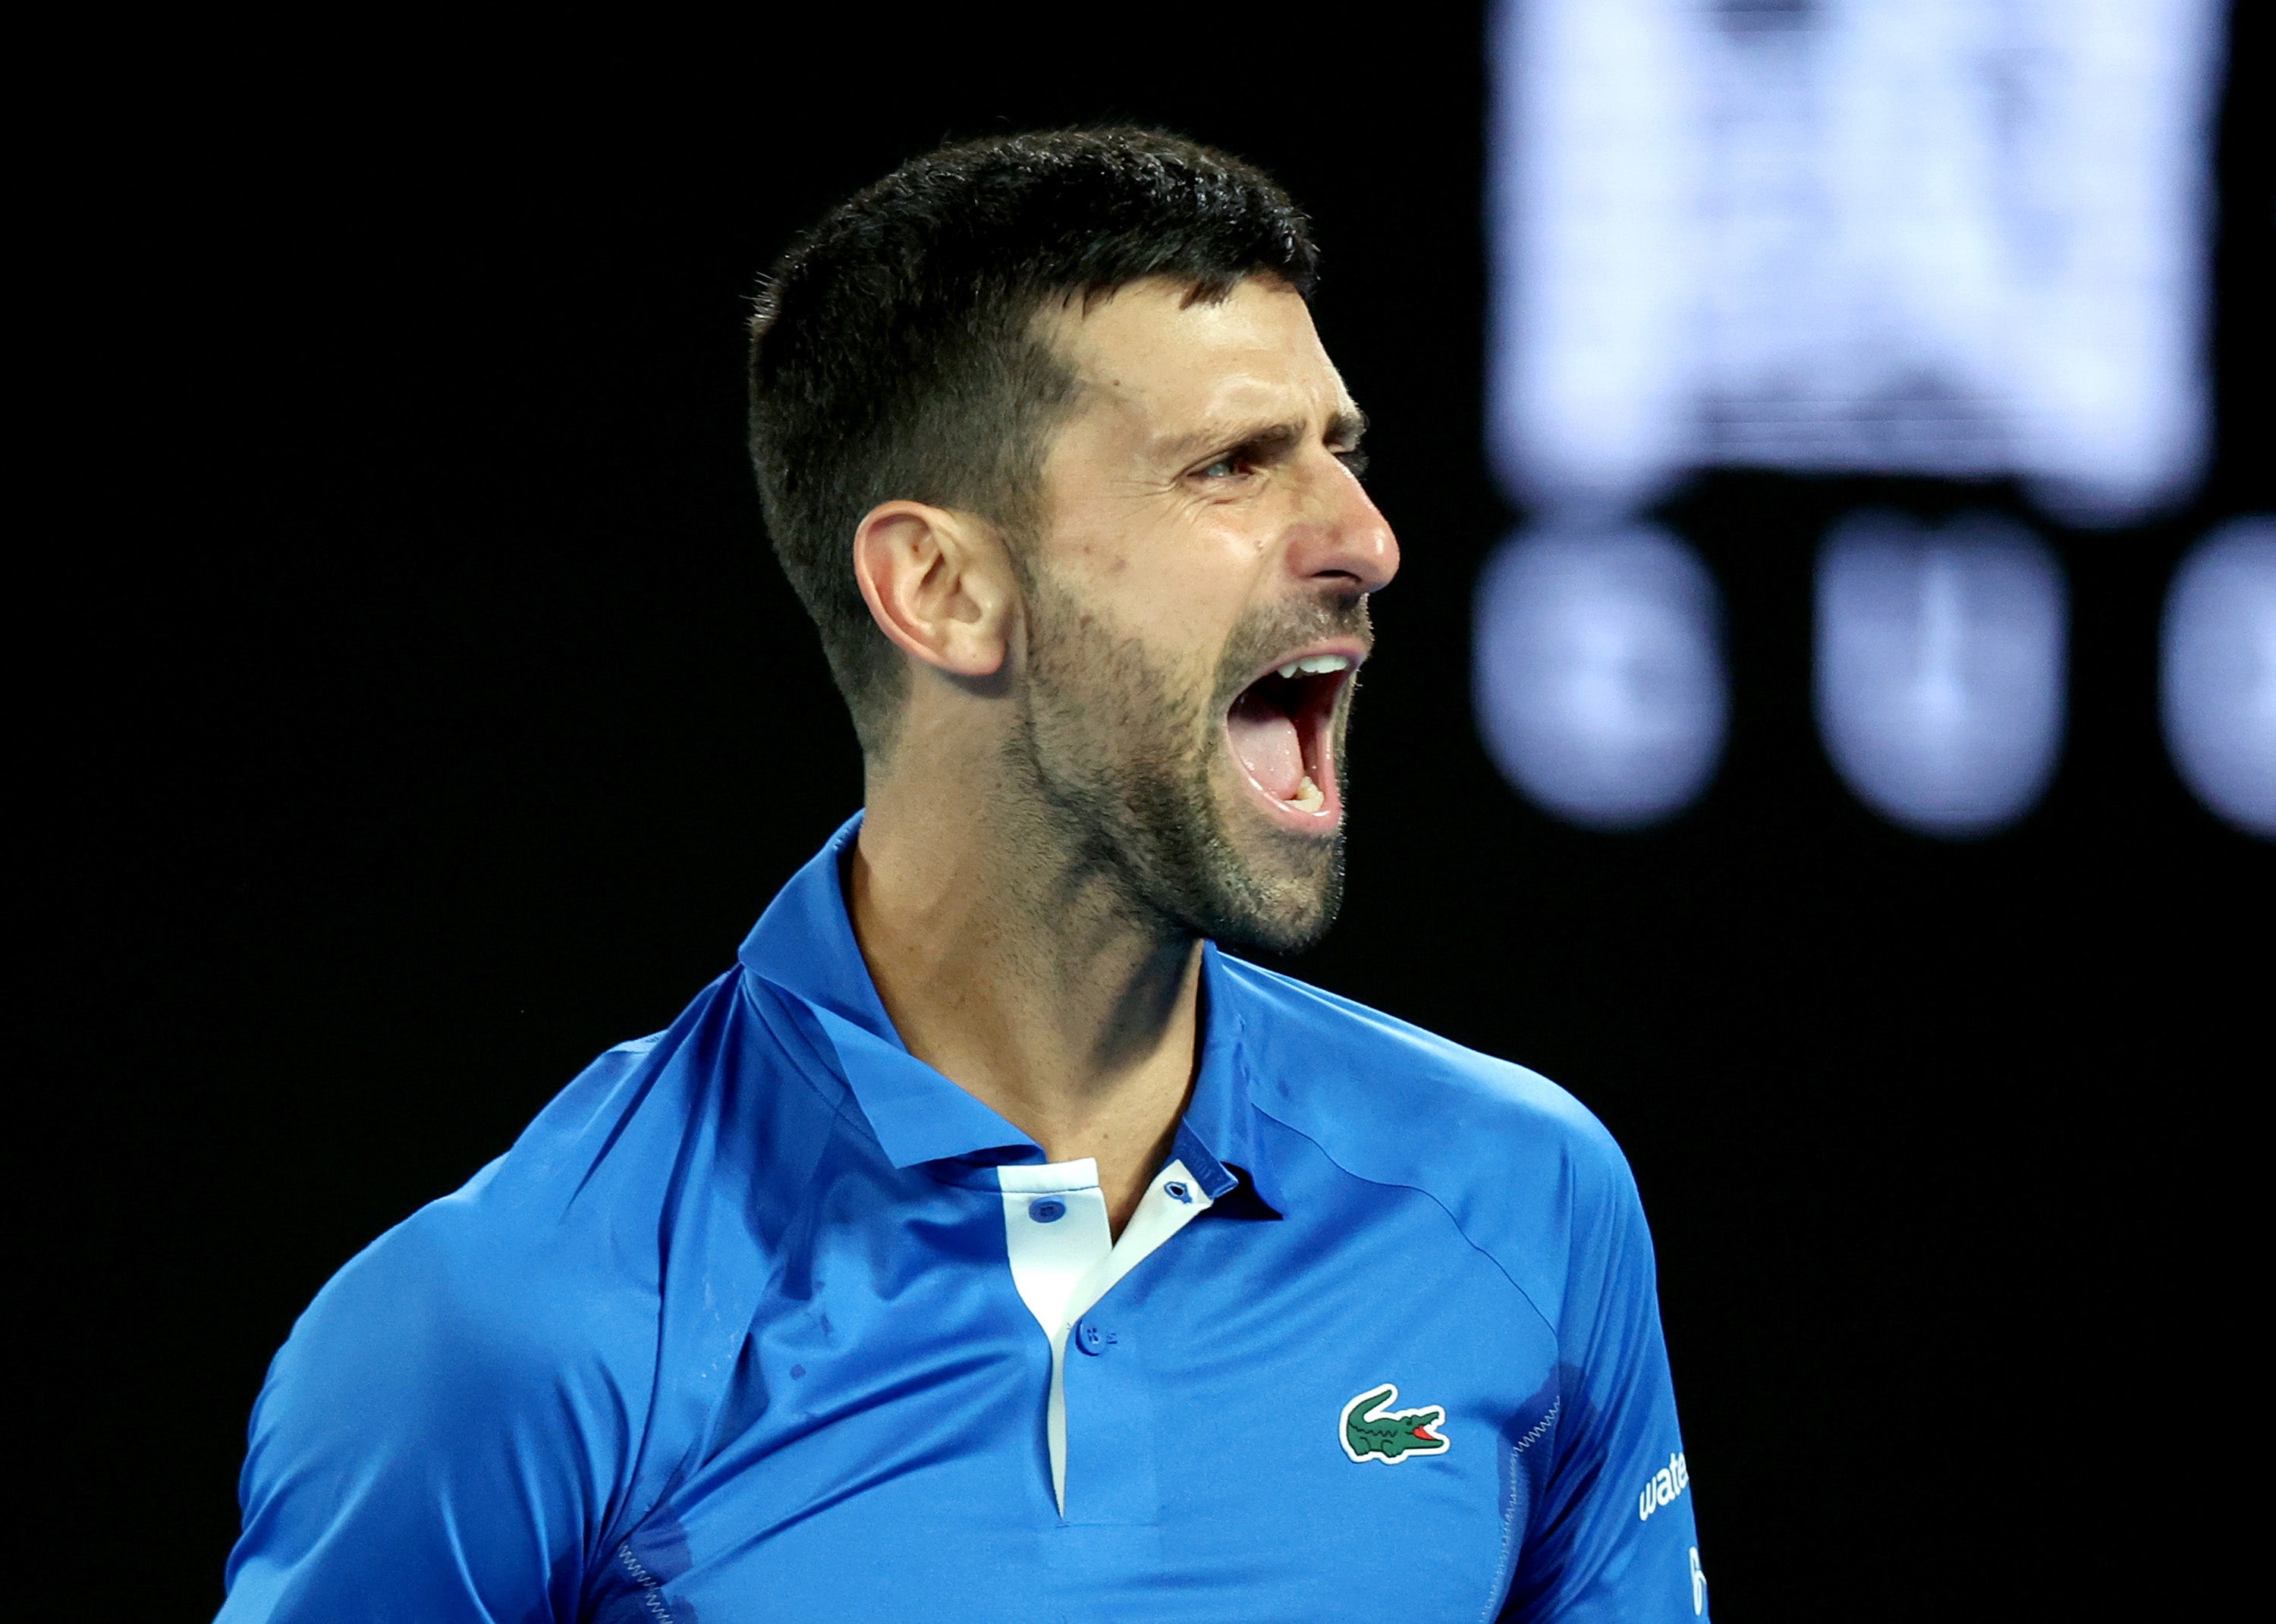 Djokovic is battling illness and injury again in Melbourne